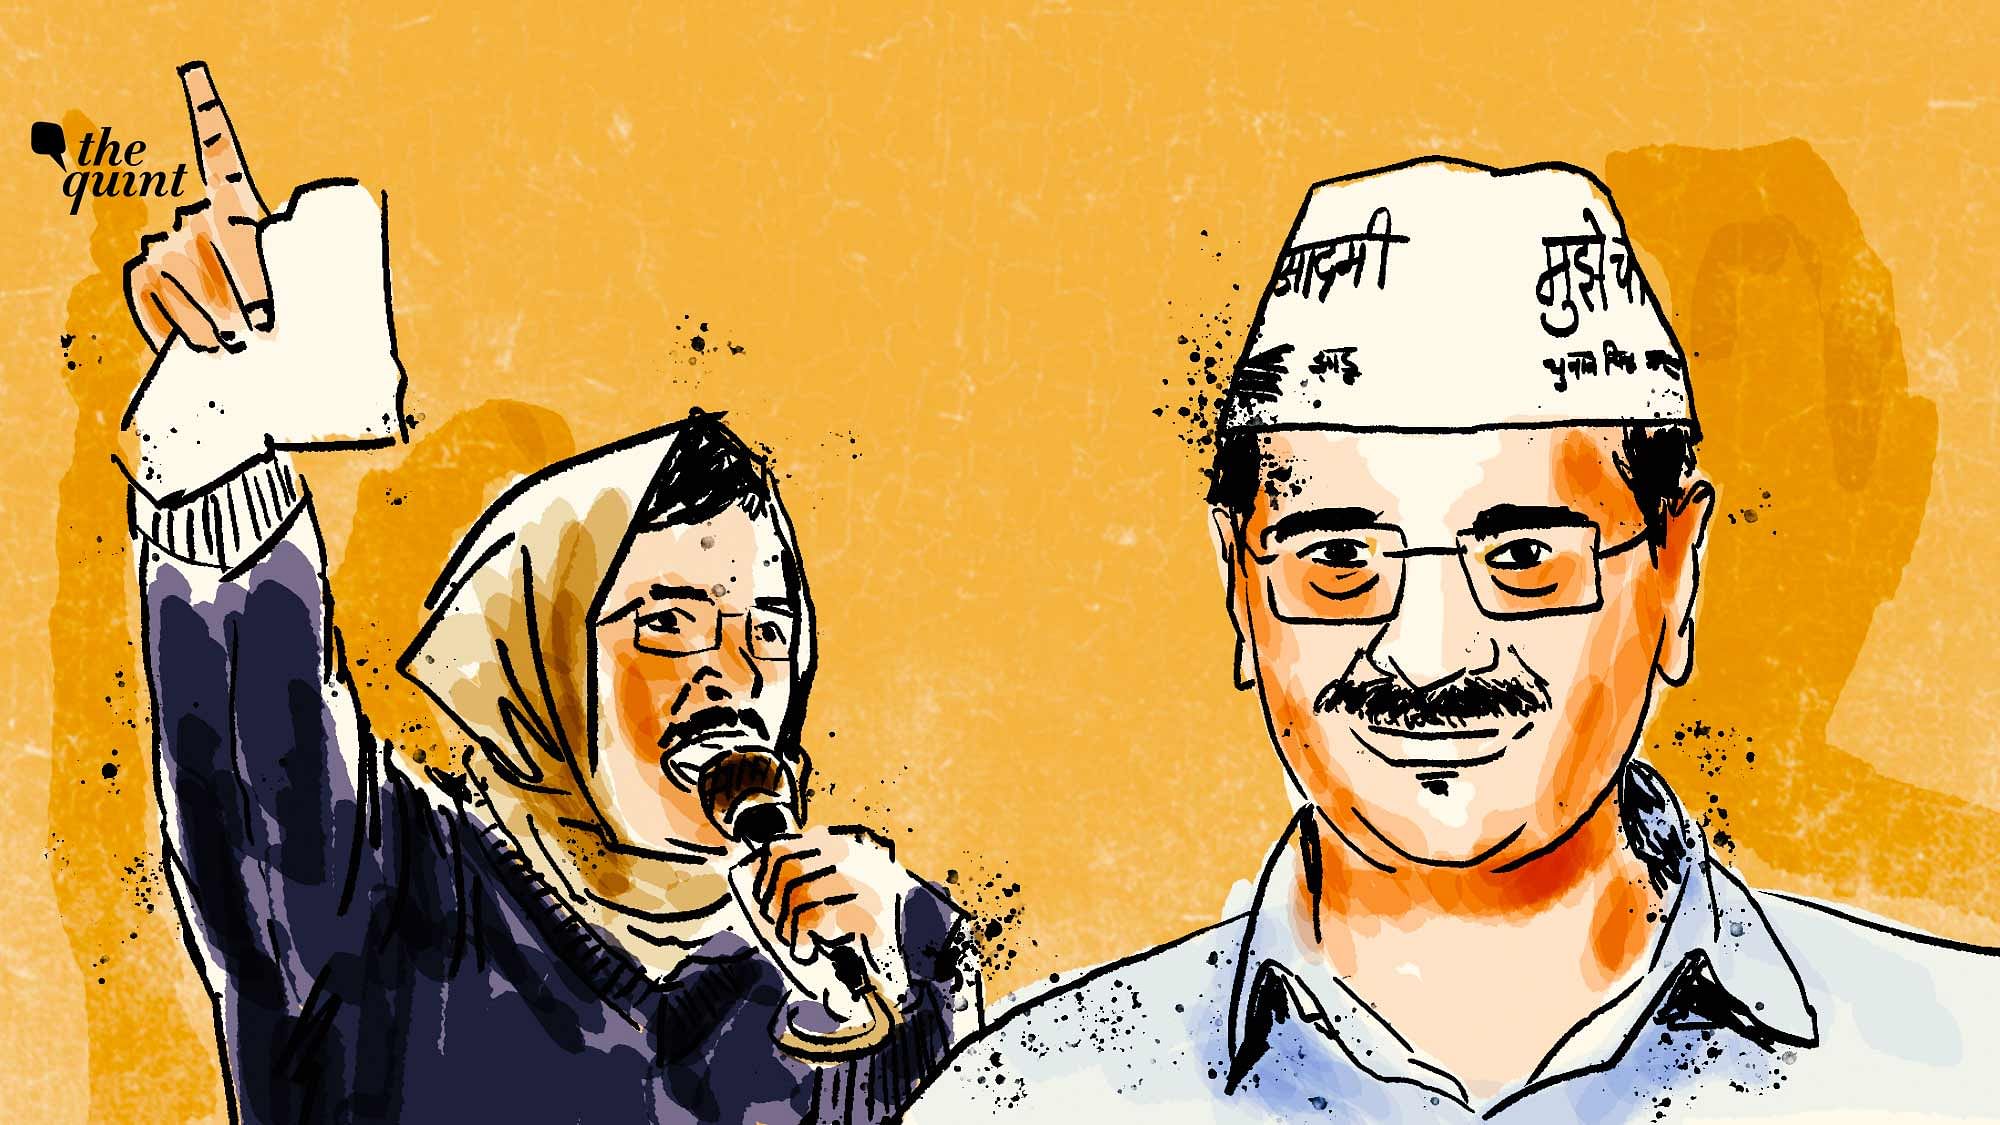 Image of “two Kejriwals” used for representational purposes.